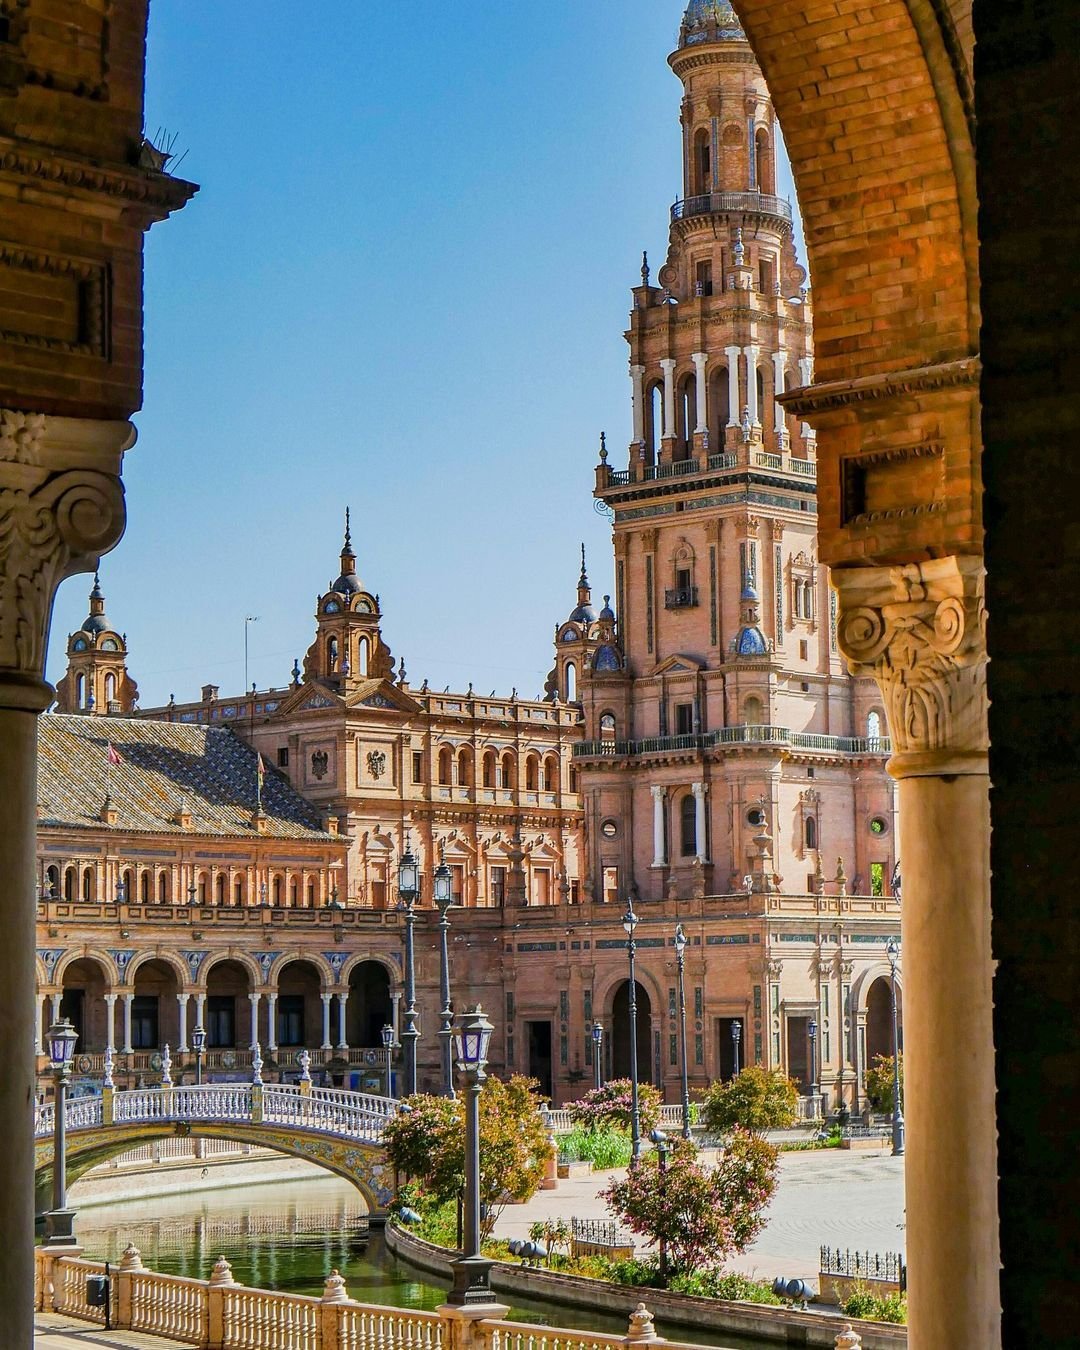 Step into a fairytale as you explore the lush landscapes and rich history of Andalucia in southern Spain. From ancient ruins to majestic cathedrals, every corner is steeped in culture and charm.

Indulge in sensory delights like the scent of orange b